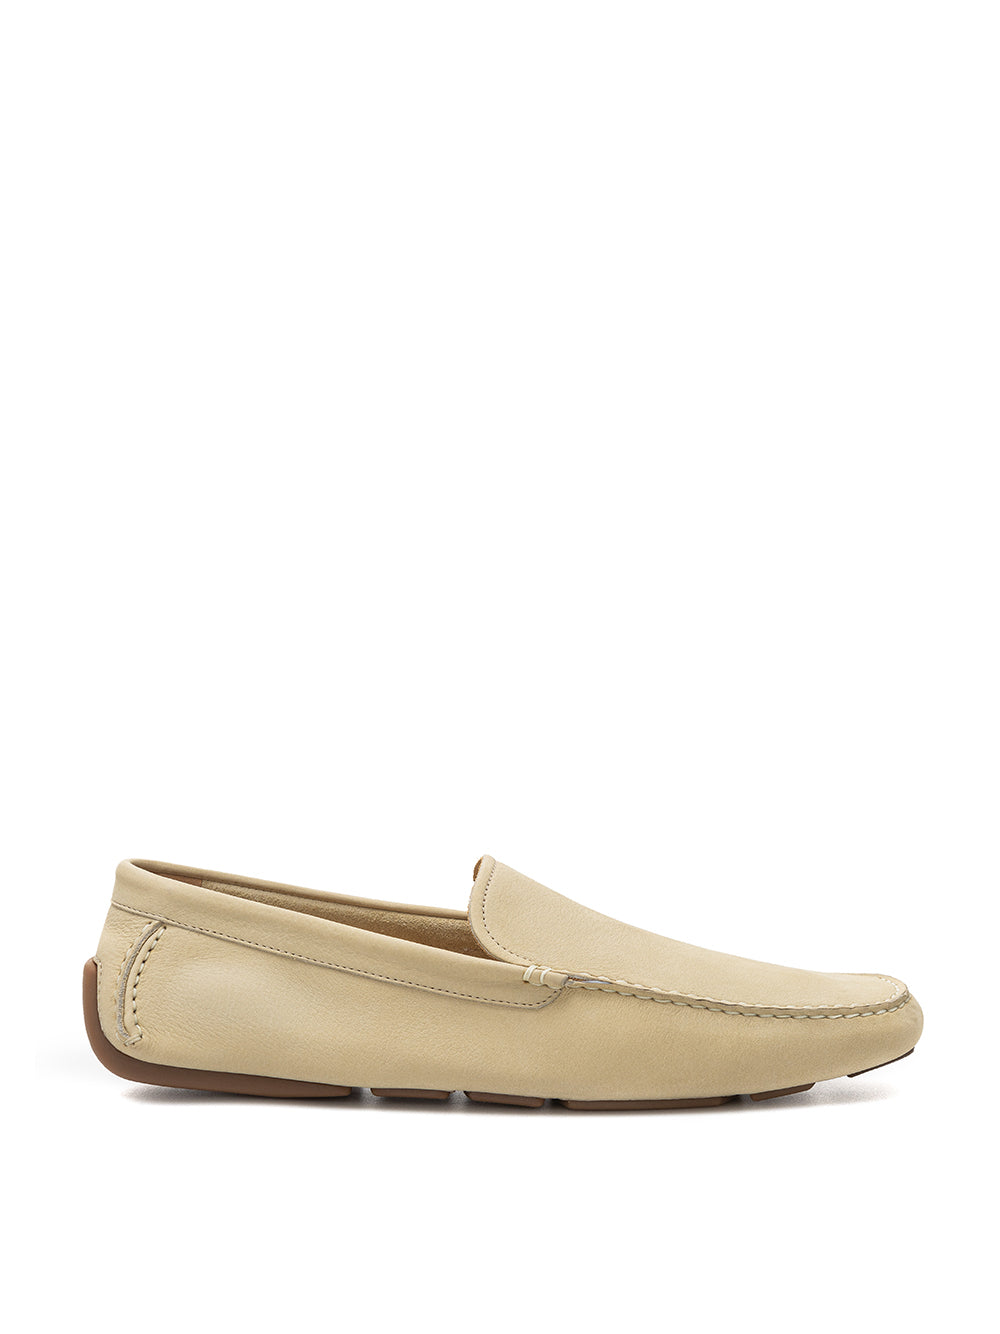 Beige Bally suede moccasin